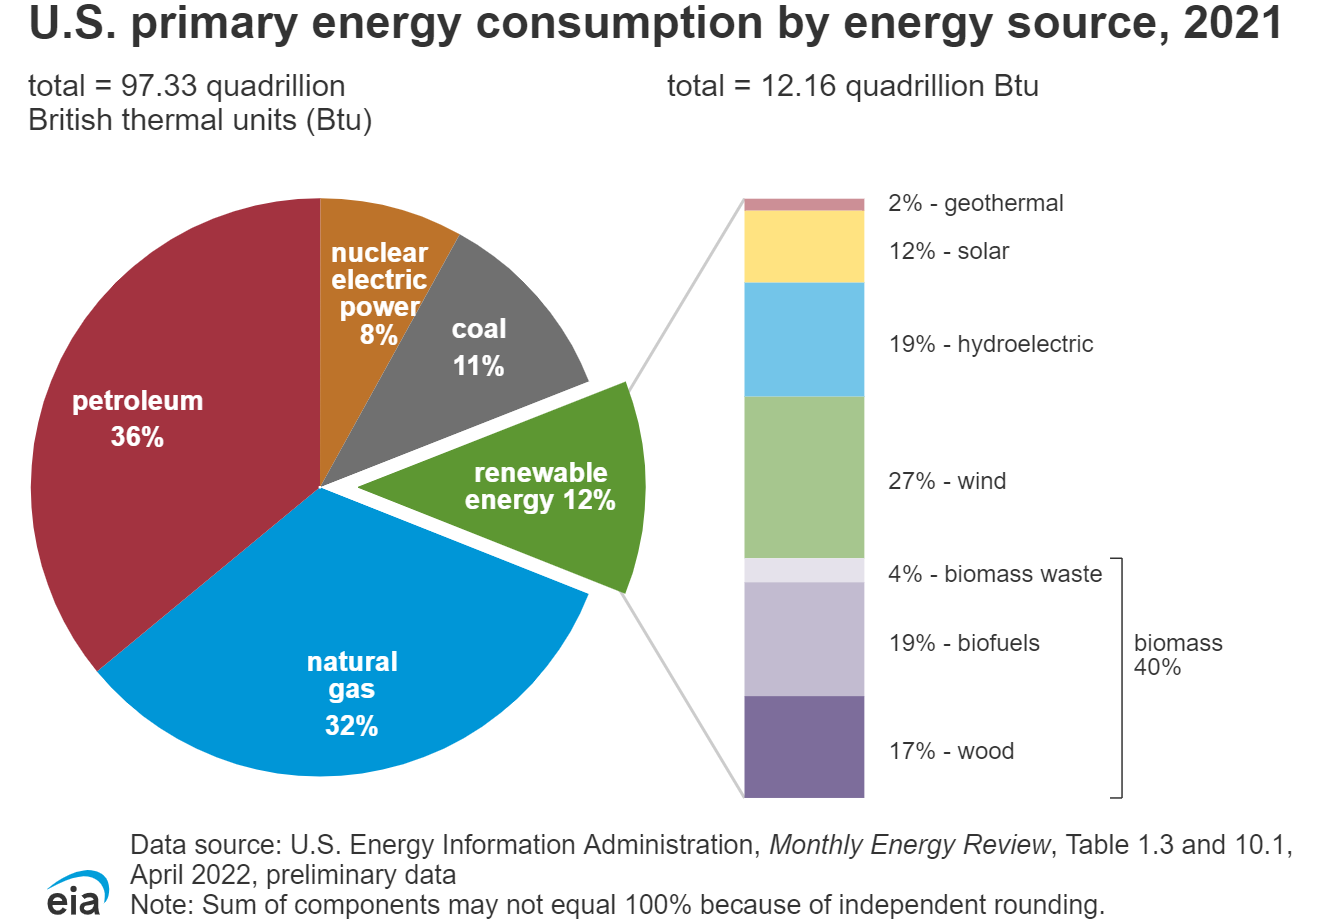 U.S. primary energy consumption by energy source, 2021